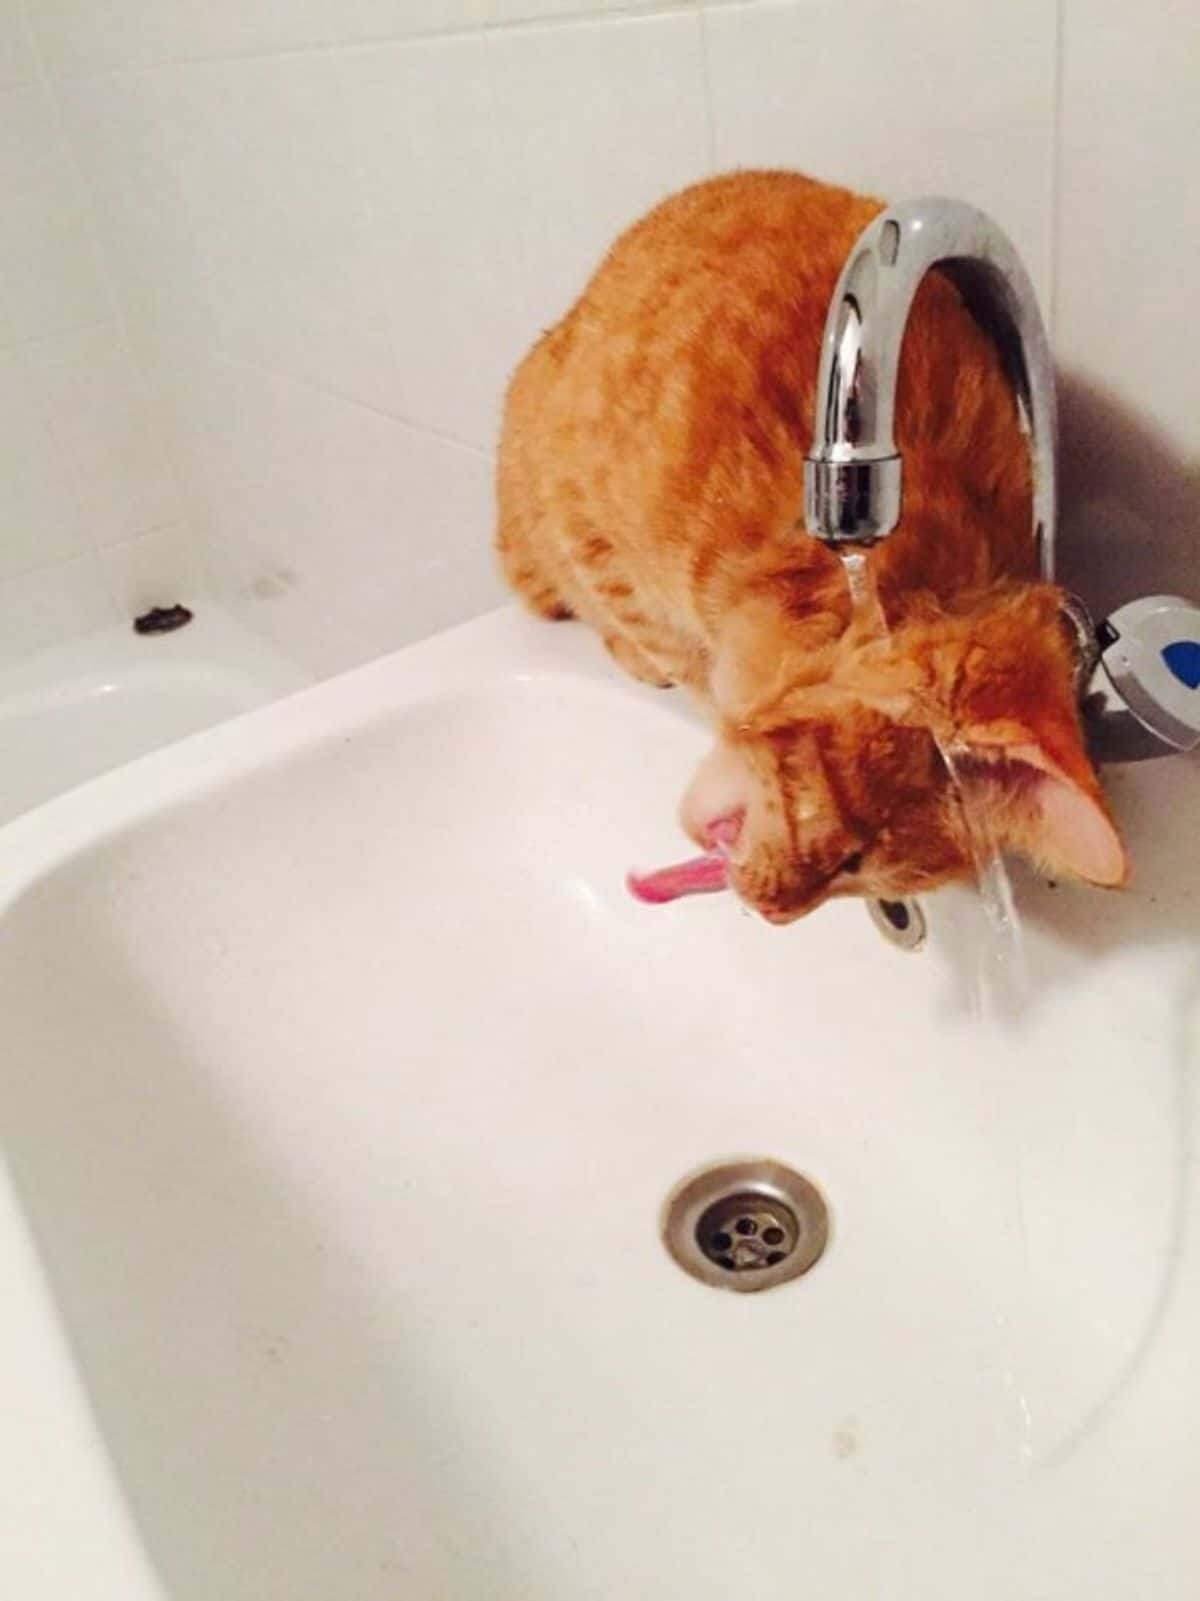 orange cat sitting on the edge of a white wash basin and having water dripping on the side of the and the tongue sticking out